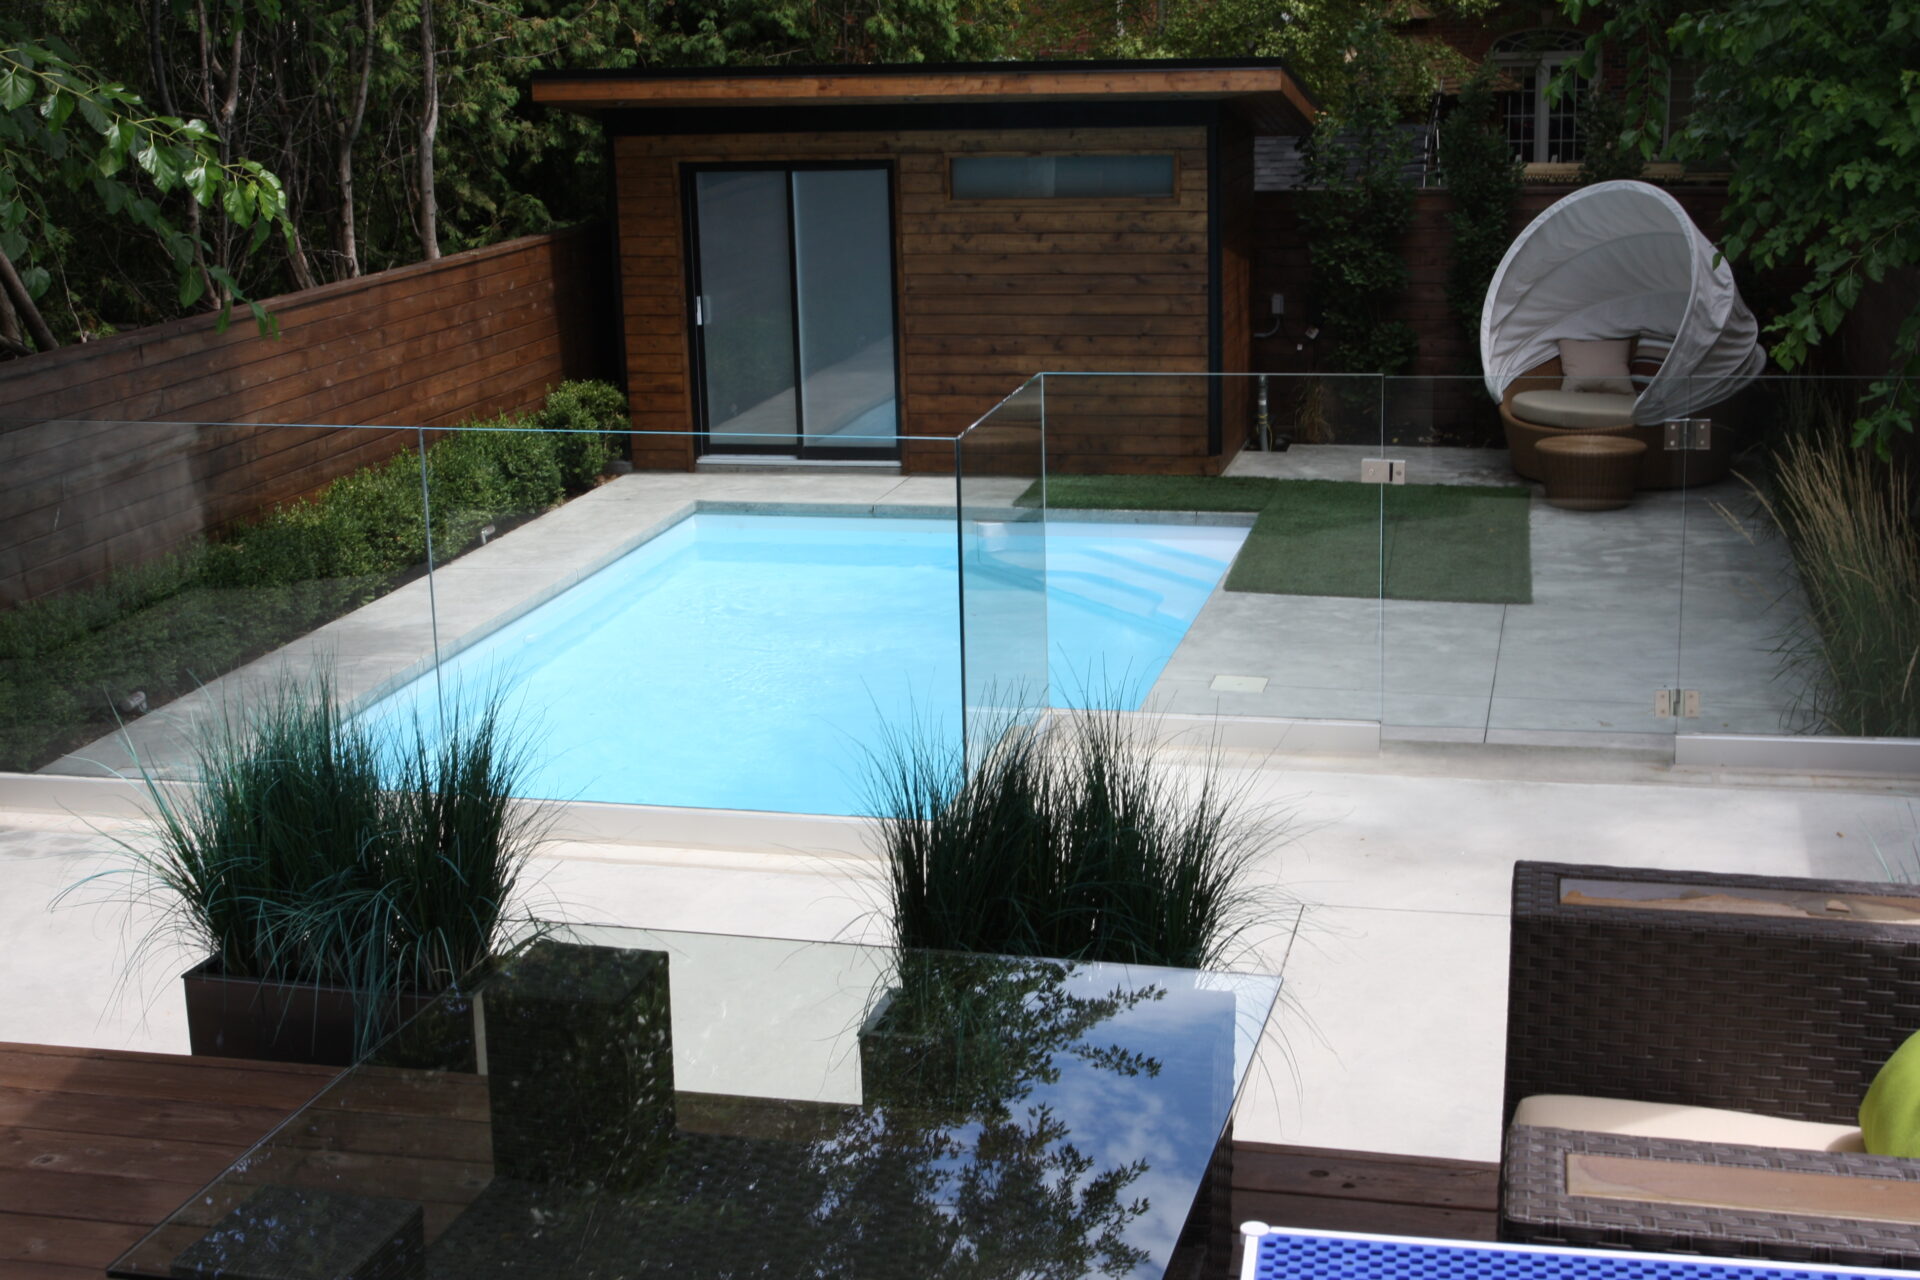 A modern backyard with a clear blue pool, glass fencing, wood decking, ornamental grasses, a cozy cocoon chair, and a small building in the background.